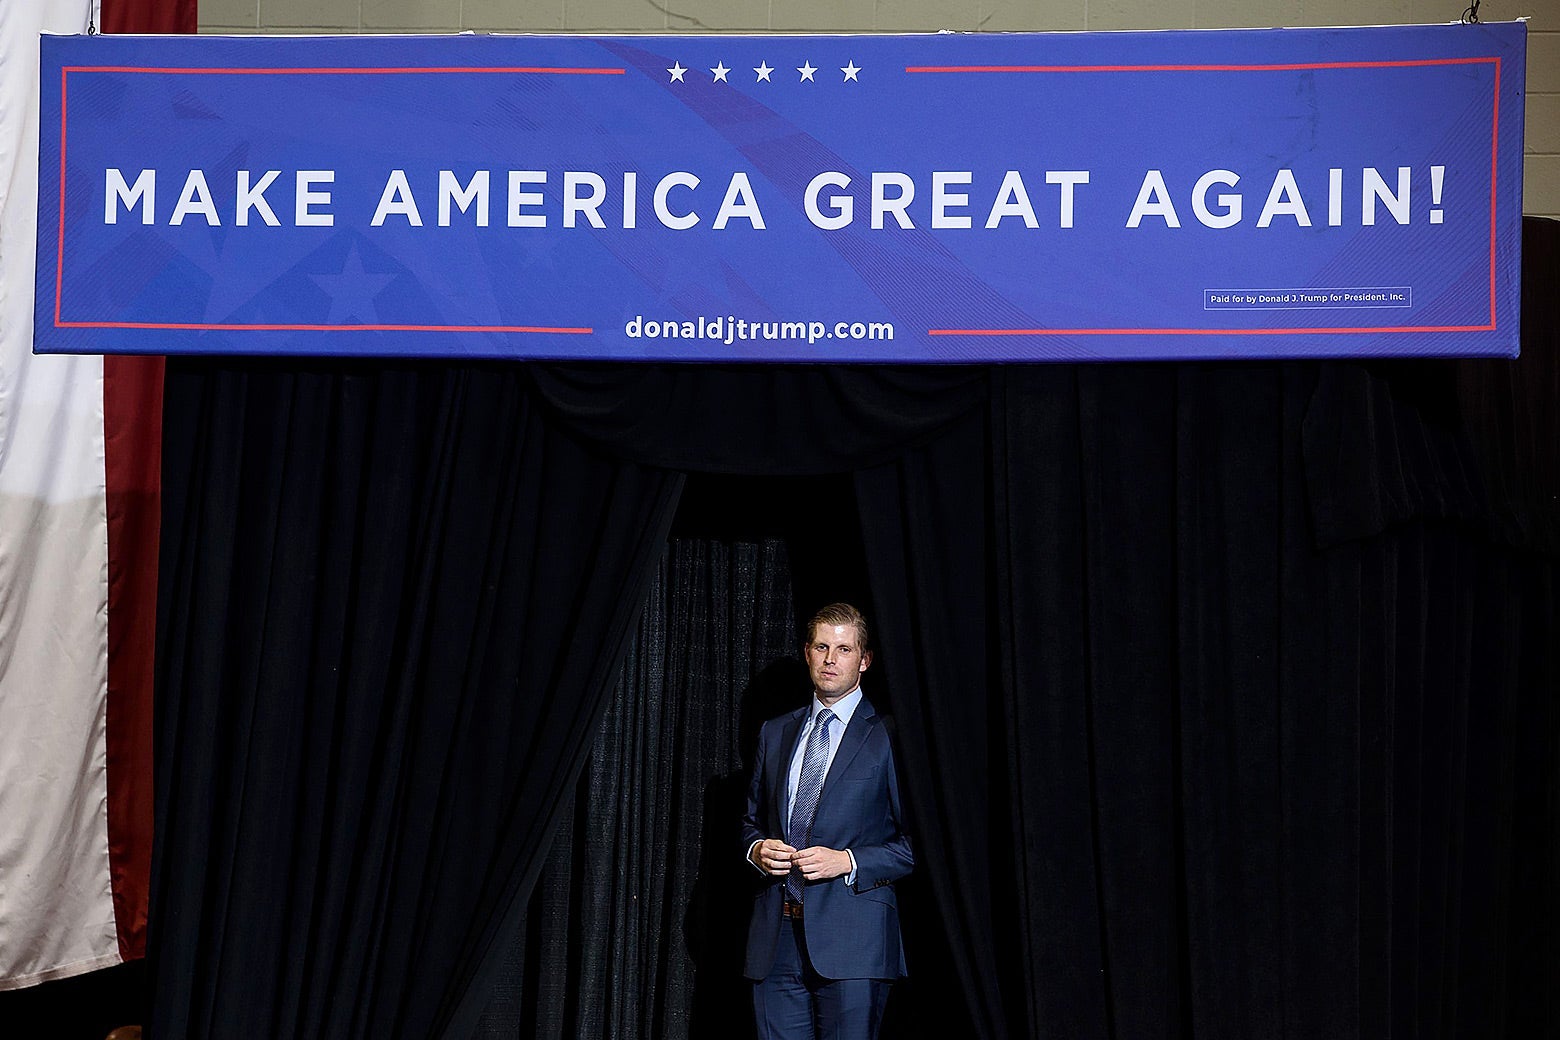 Eric Trump stands in the wings of a stage with a "Make America Great Again" sign over him.